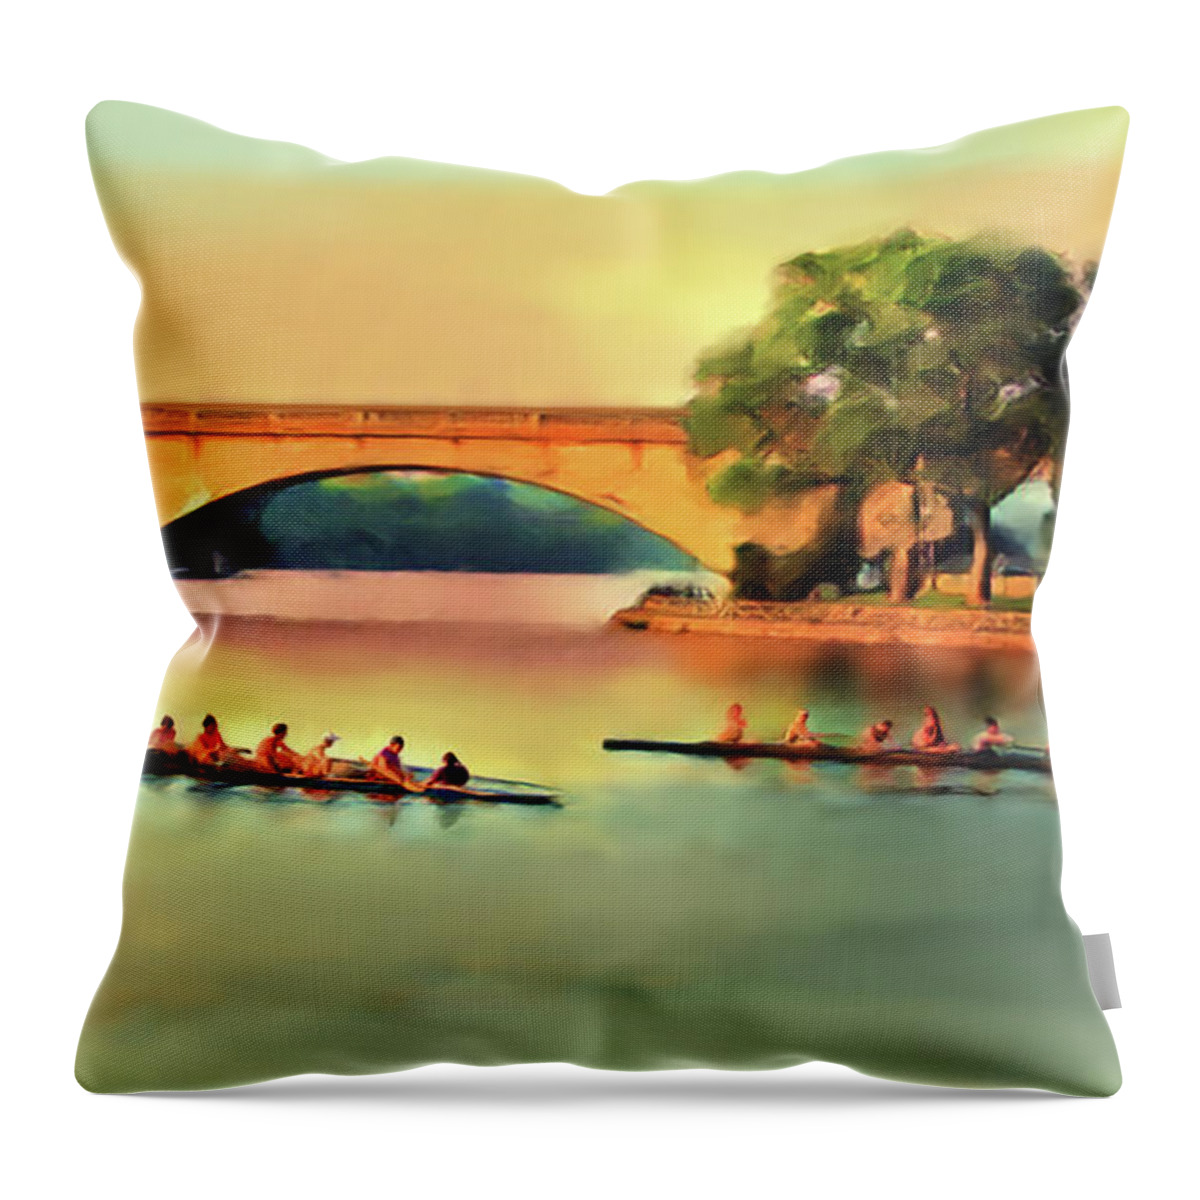 Tired Throw Pillow featuring the painting Tired Crew by Joel Smith